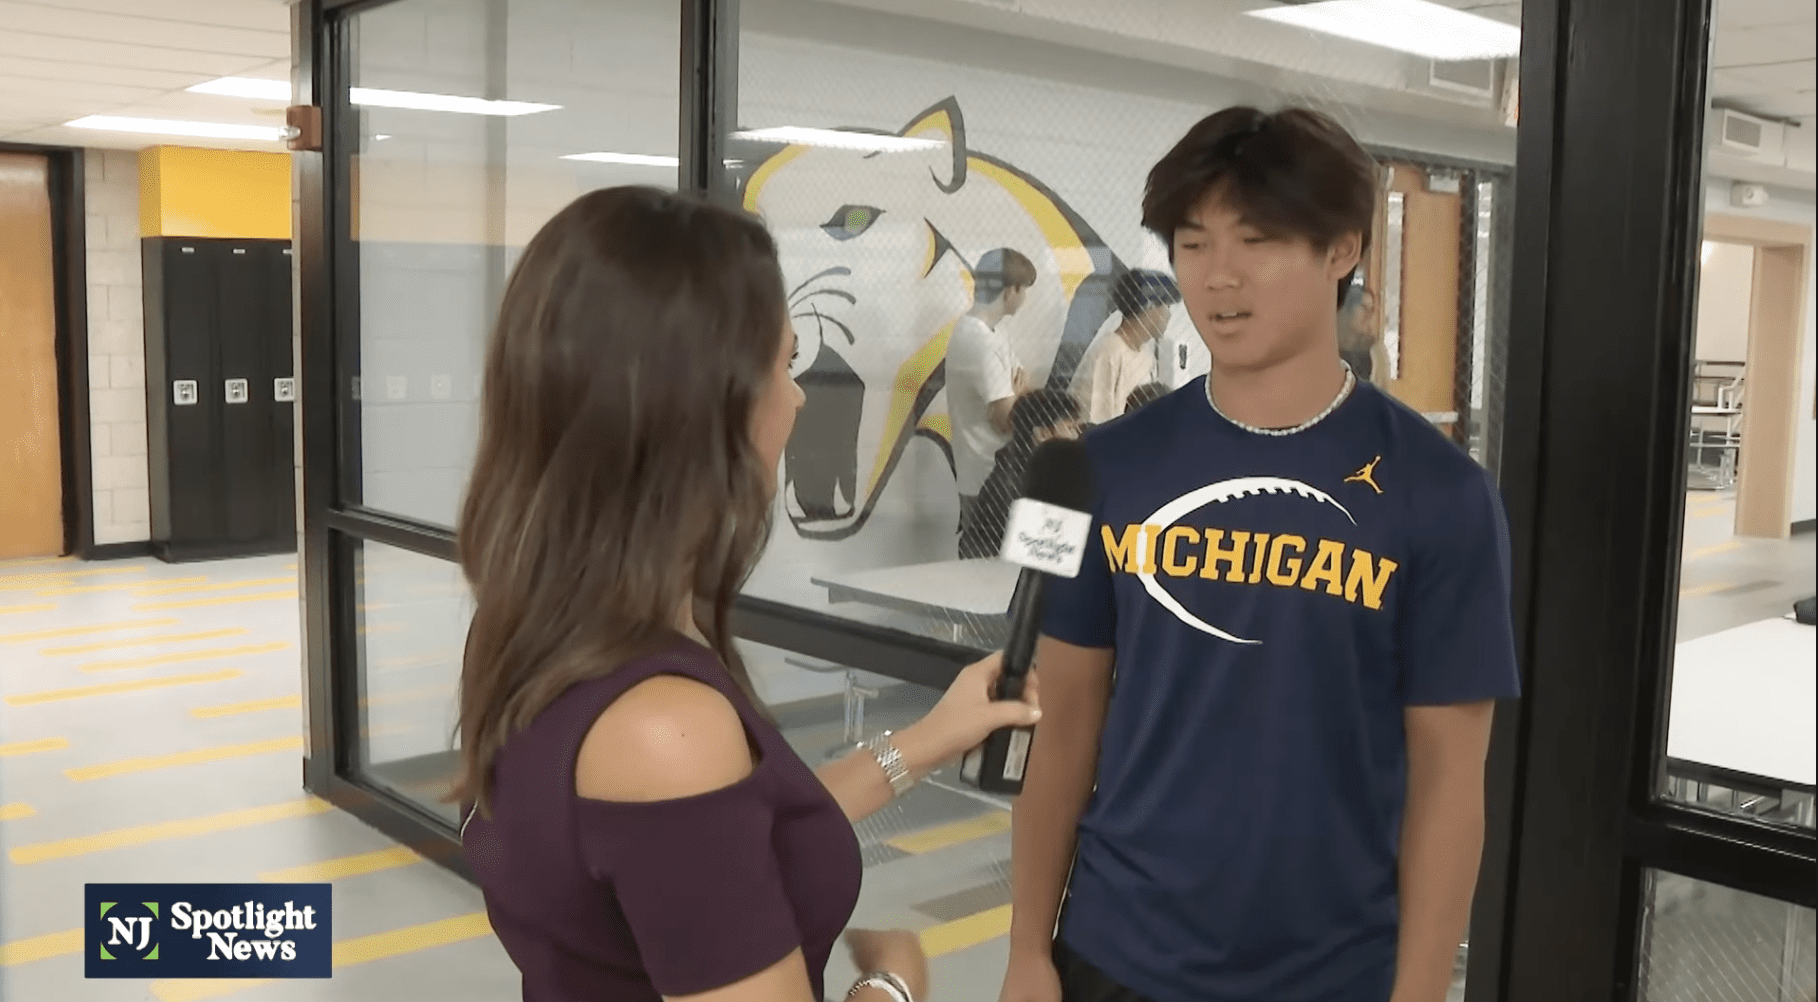 NJ Spotlight News interviews Junior at Cresskill Schools who returns to the high school for the first time. 